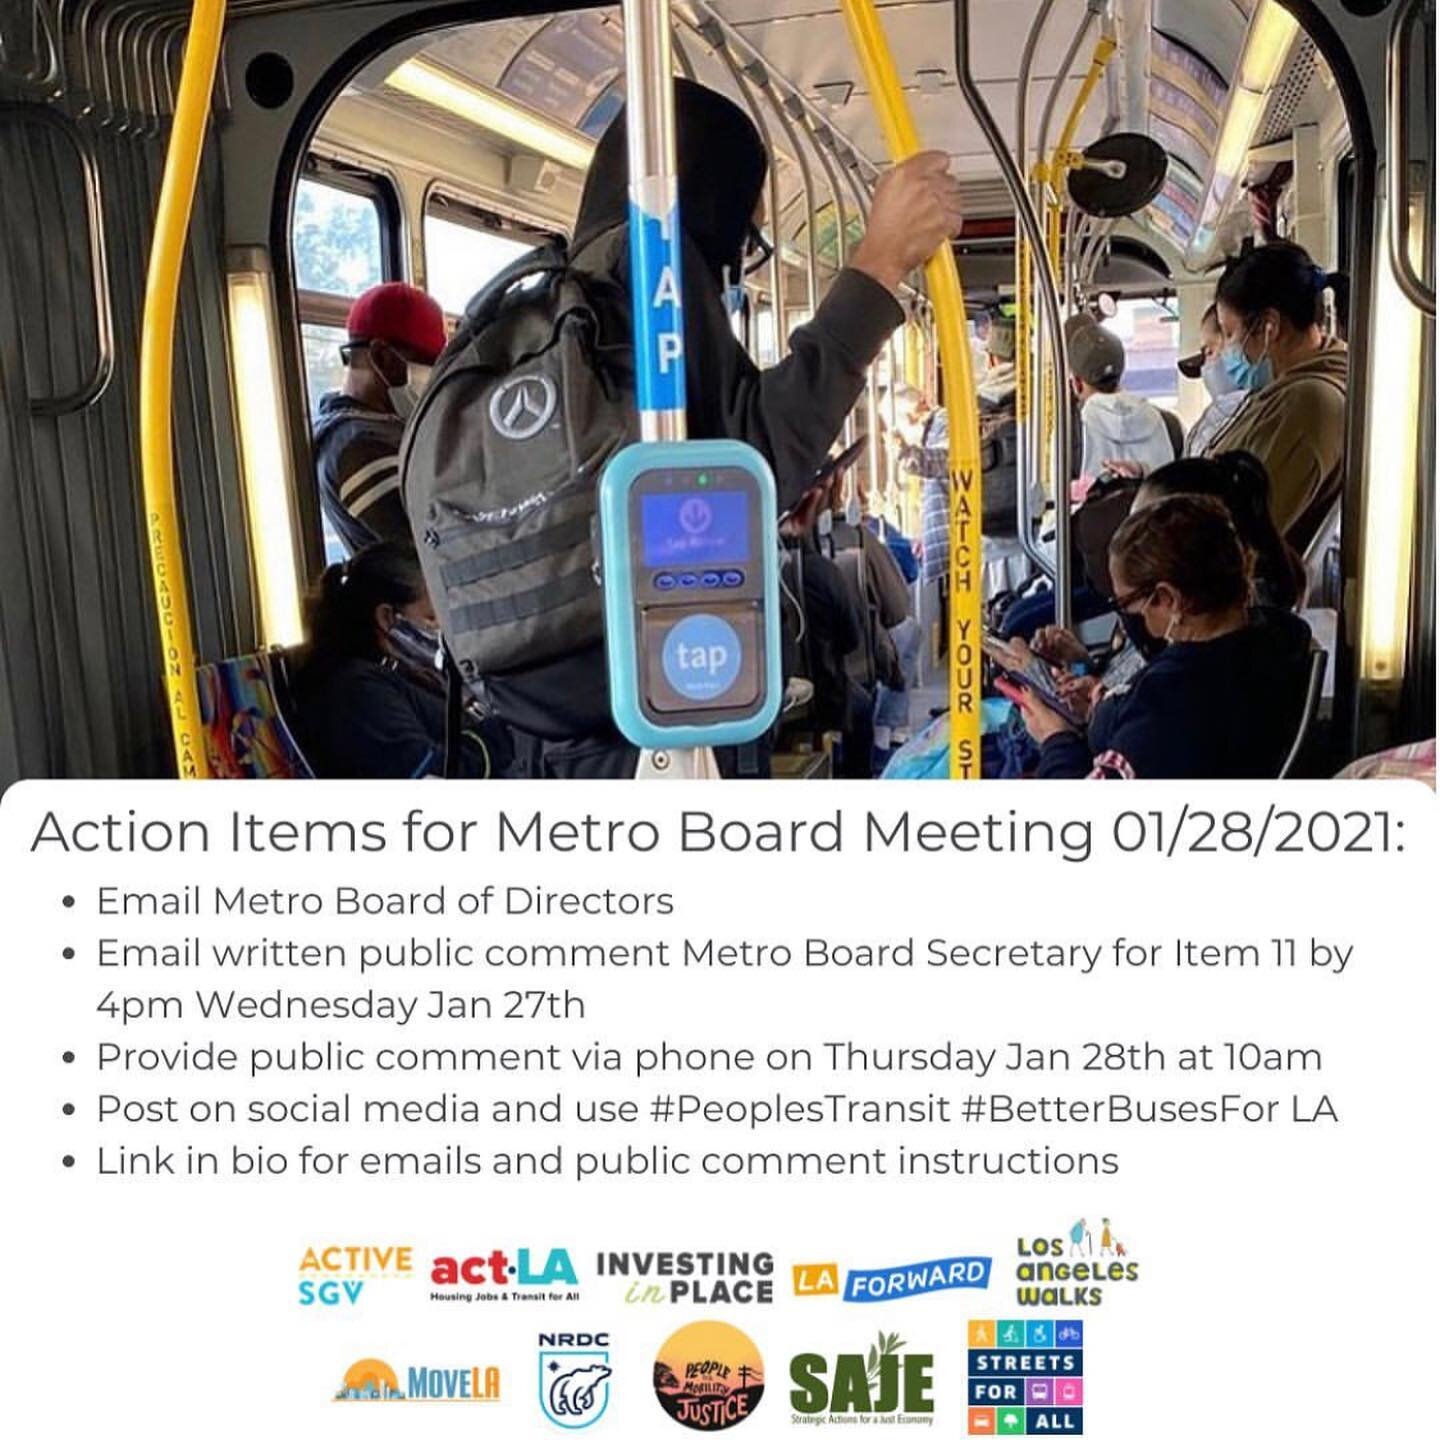 Reposting this action item from @investinplace who does an incredible job untangling the complexities of public transit in Los Angeles.
We have sent our formal letter opposing Item 11 on tomorrow&rsquo;s @metrolosangeles agenda. We must restore servi